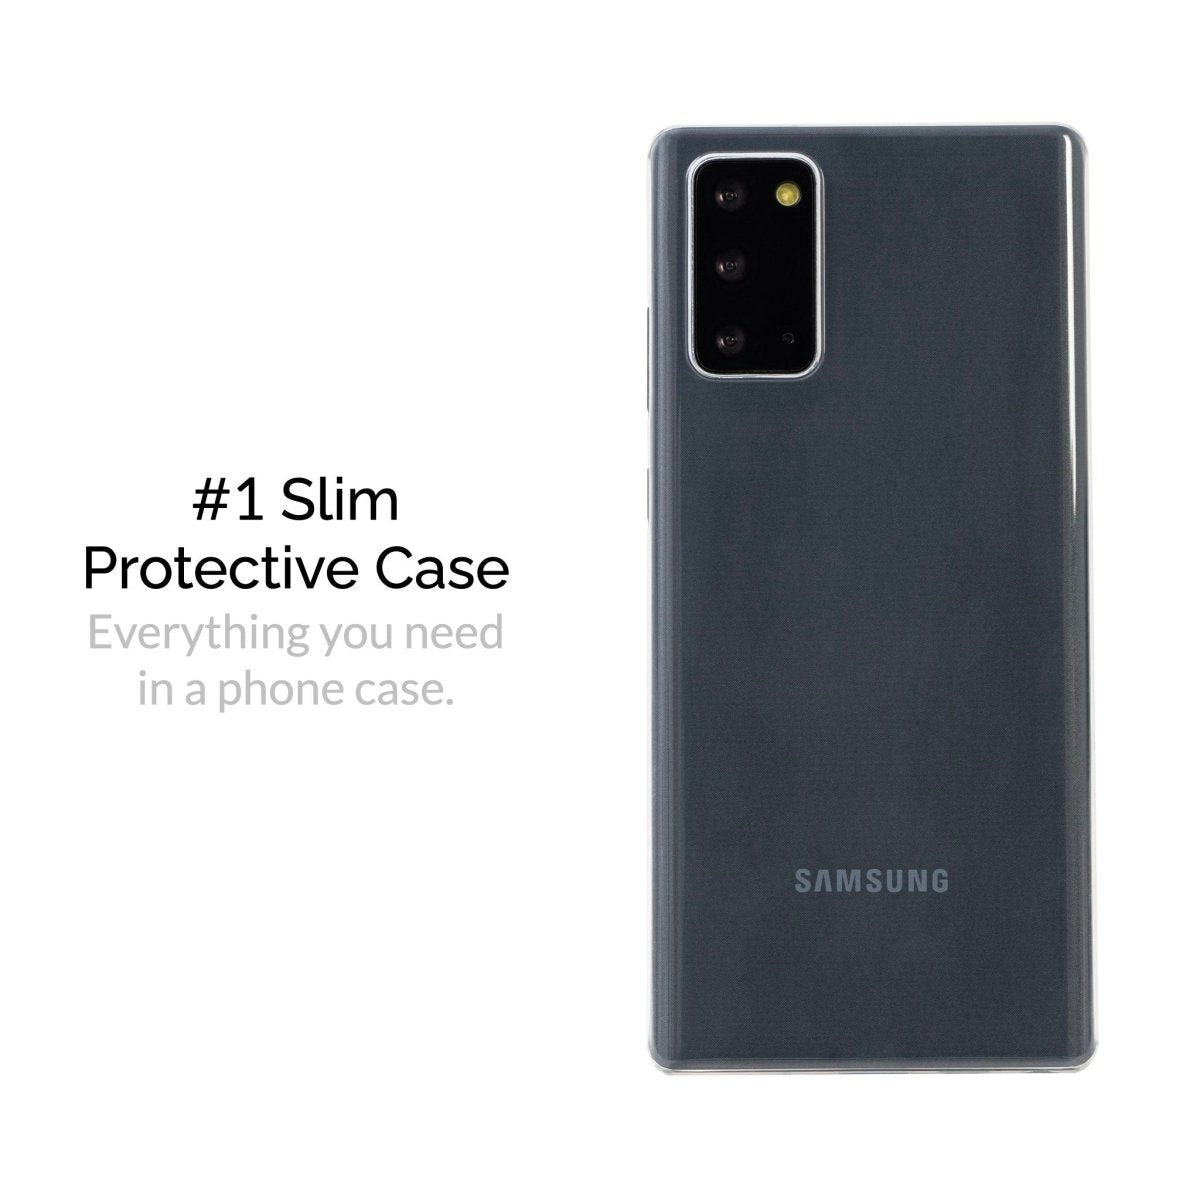 Slimcase Mobile Back Cover for Galaxy S20 Series - Slimcase IndiaCase